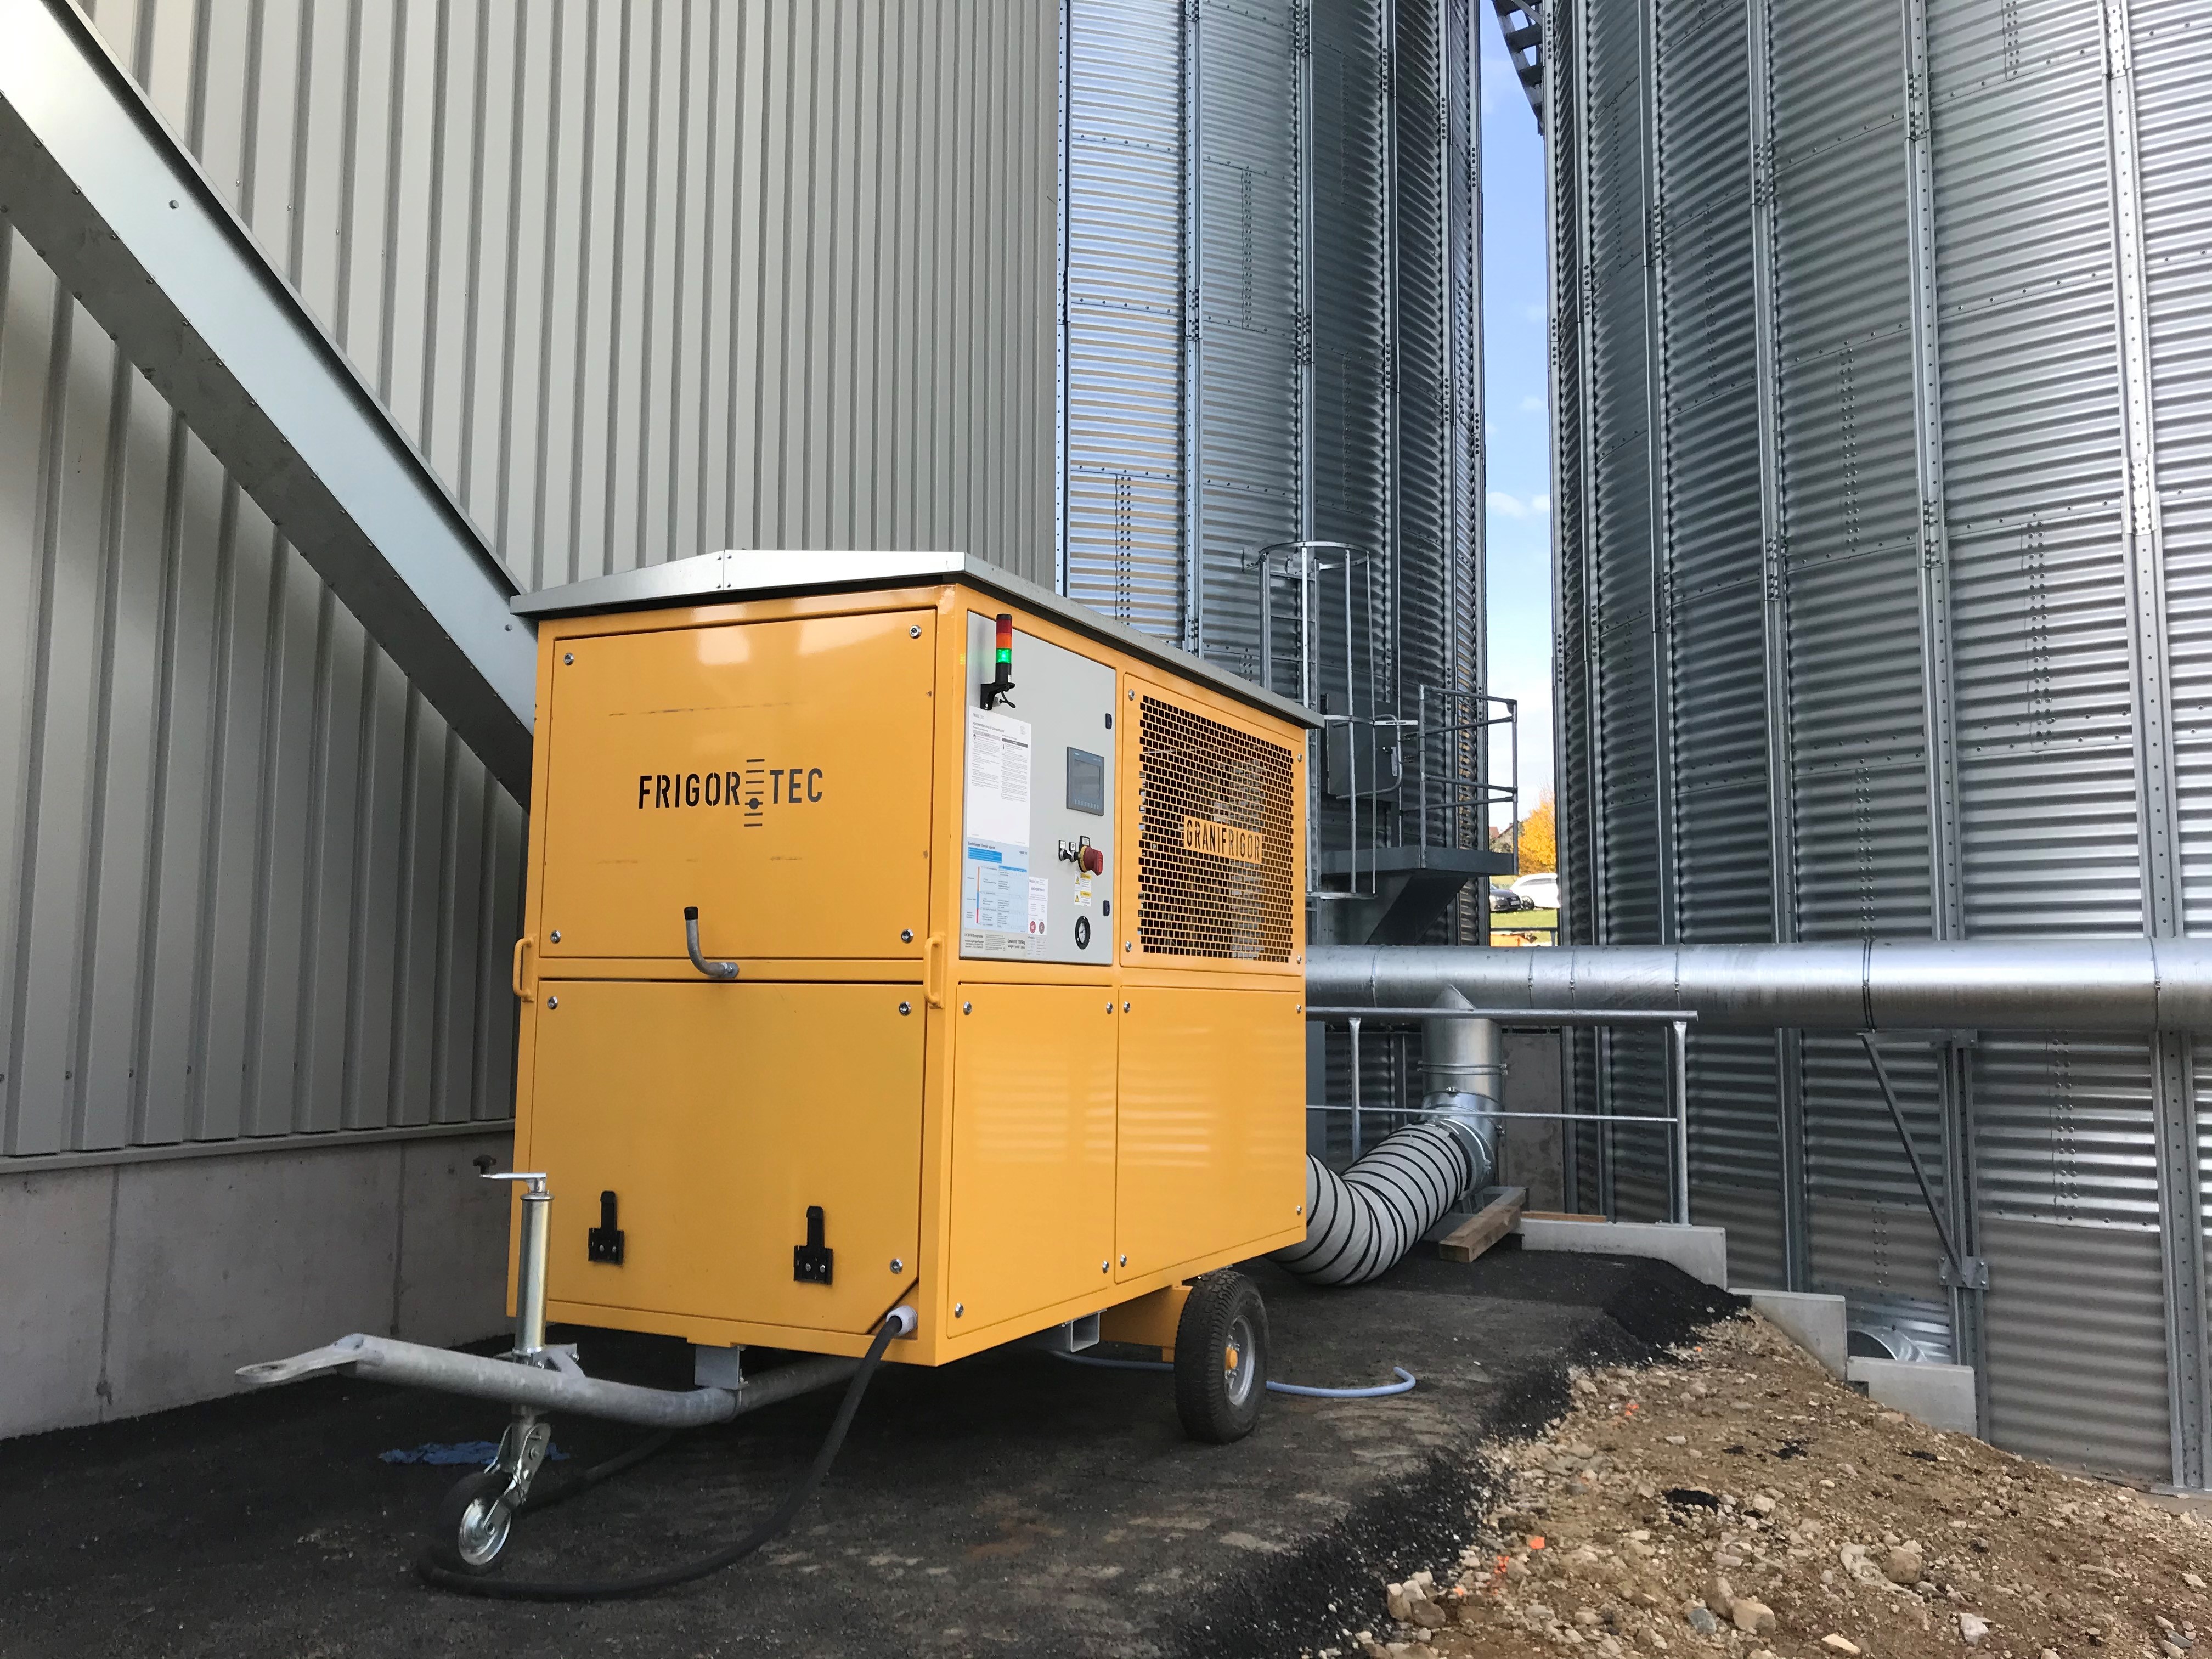 Grain cooler unit used in Germany 2020